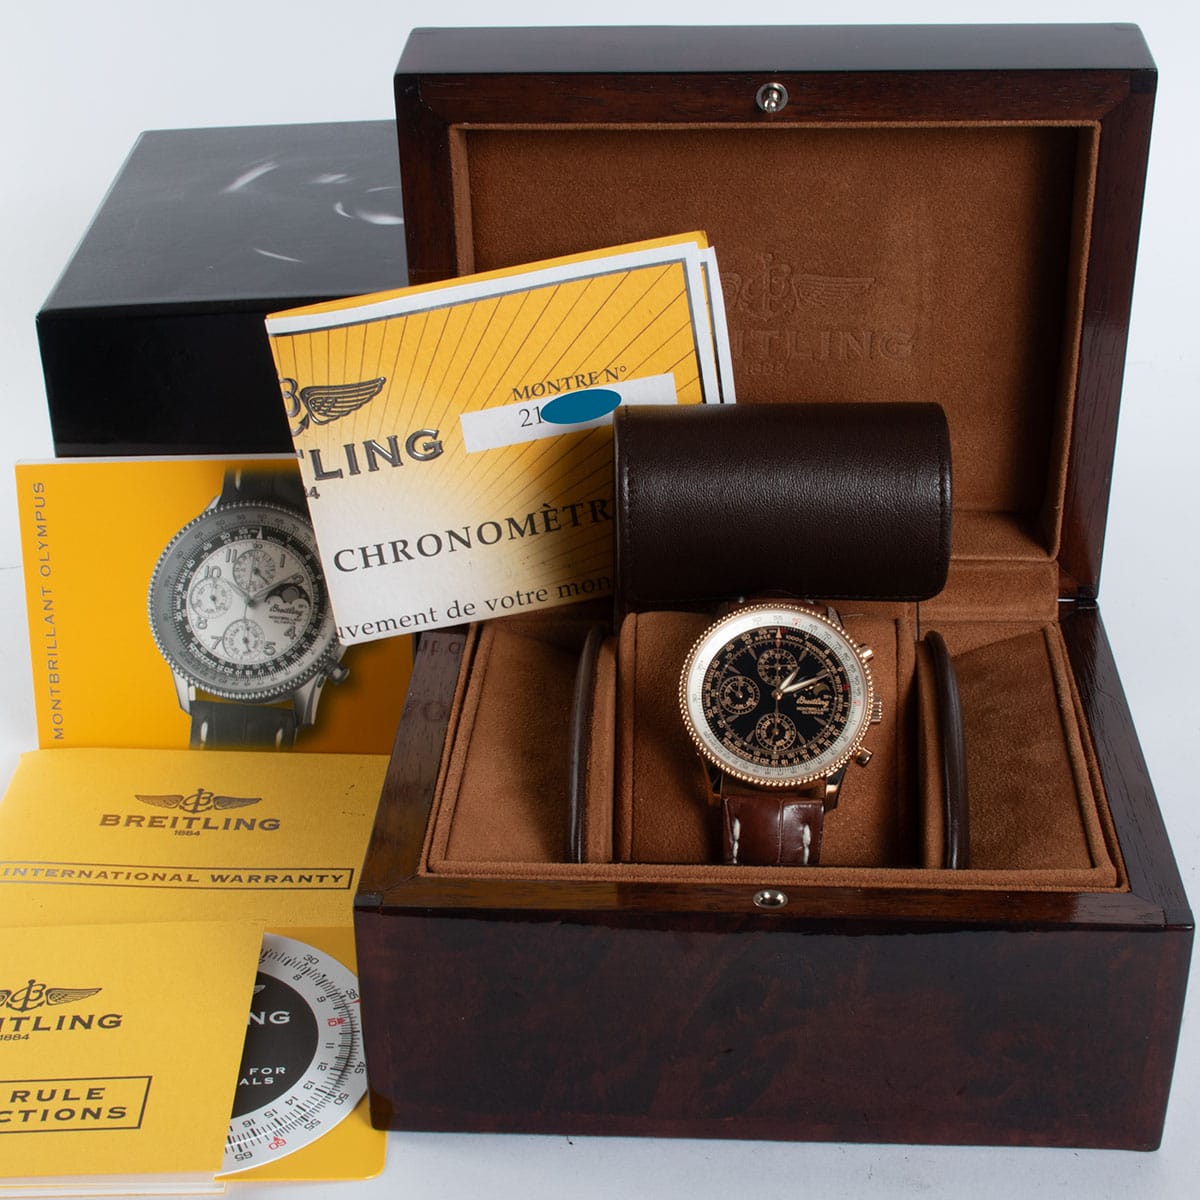 View in Box of Navitimer Montbrillant Olympus LE